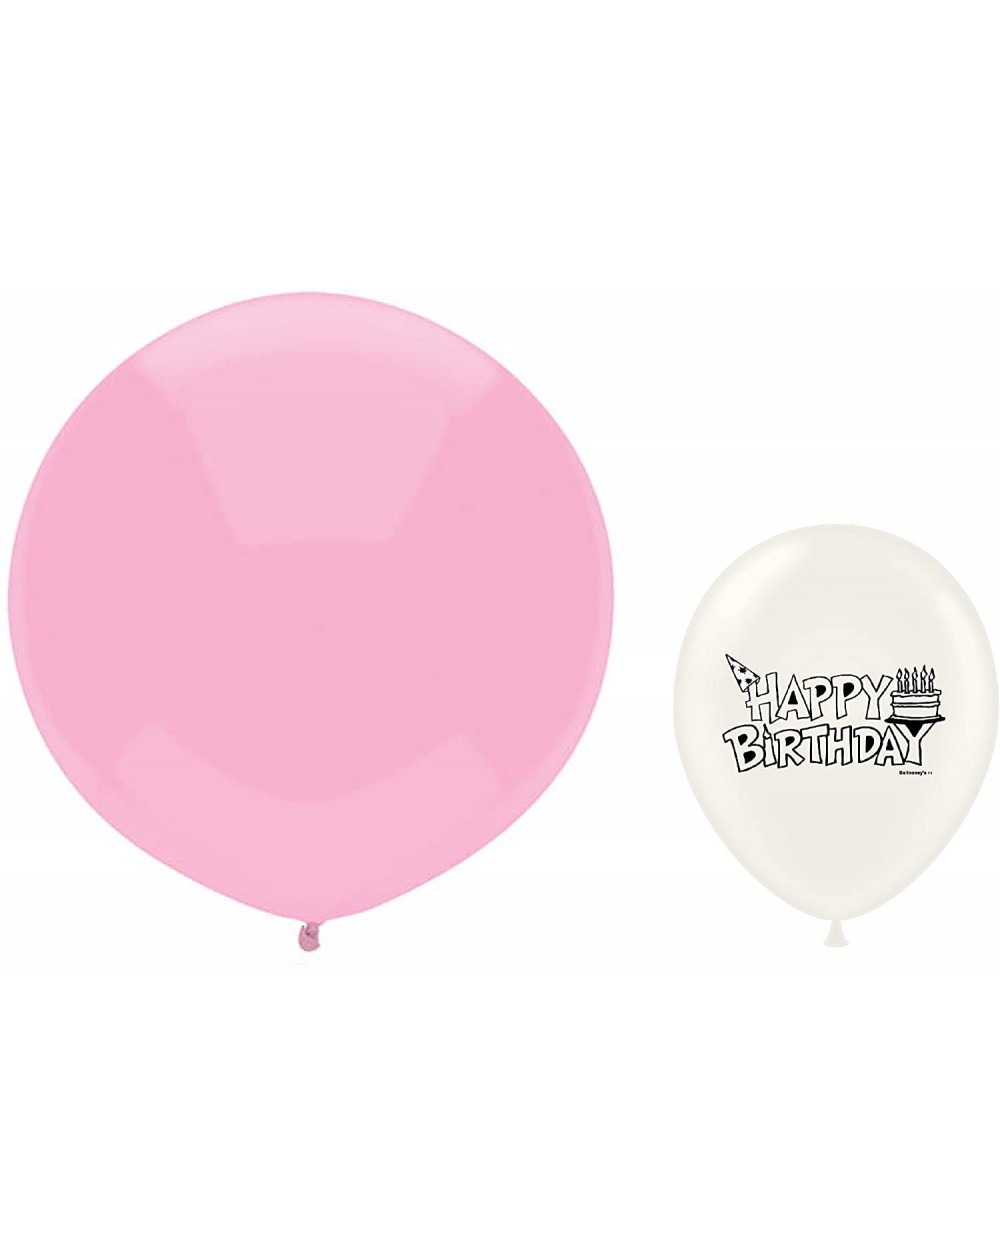 Balloons 17" Outdoor Display Balloons Bundle Bag of 72 (Real Pink) - Real Pink - CL1892YZ487 $29.30